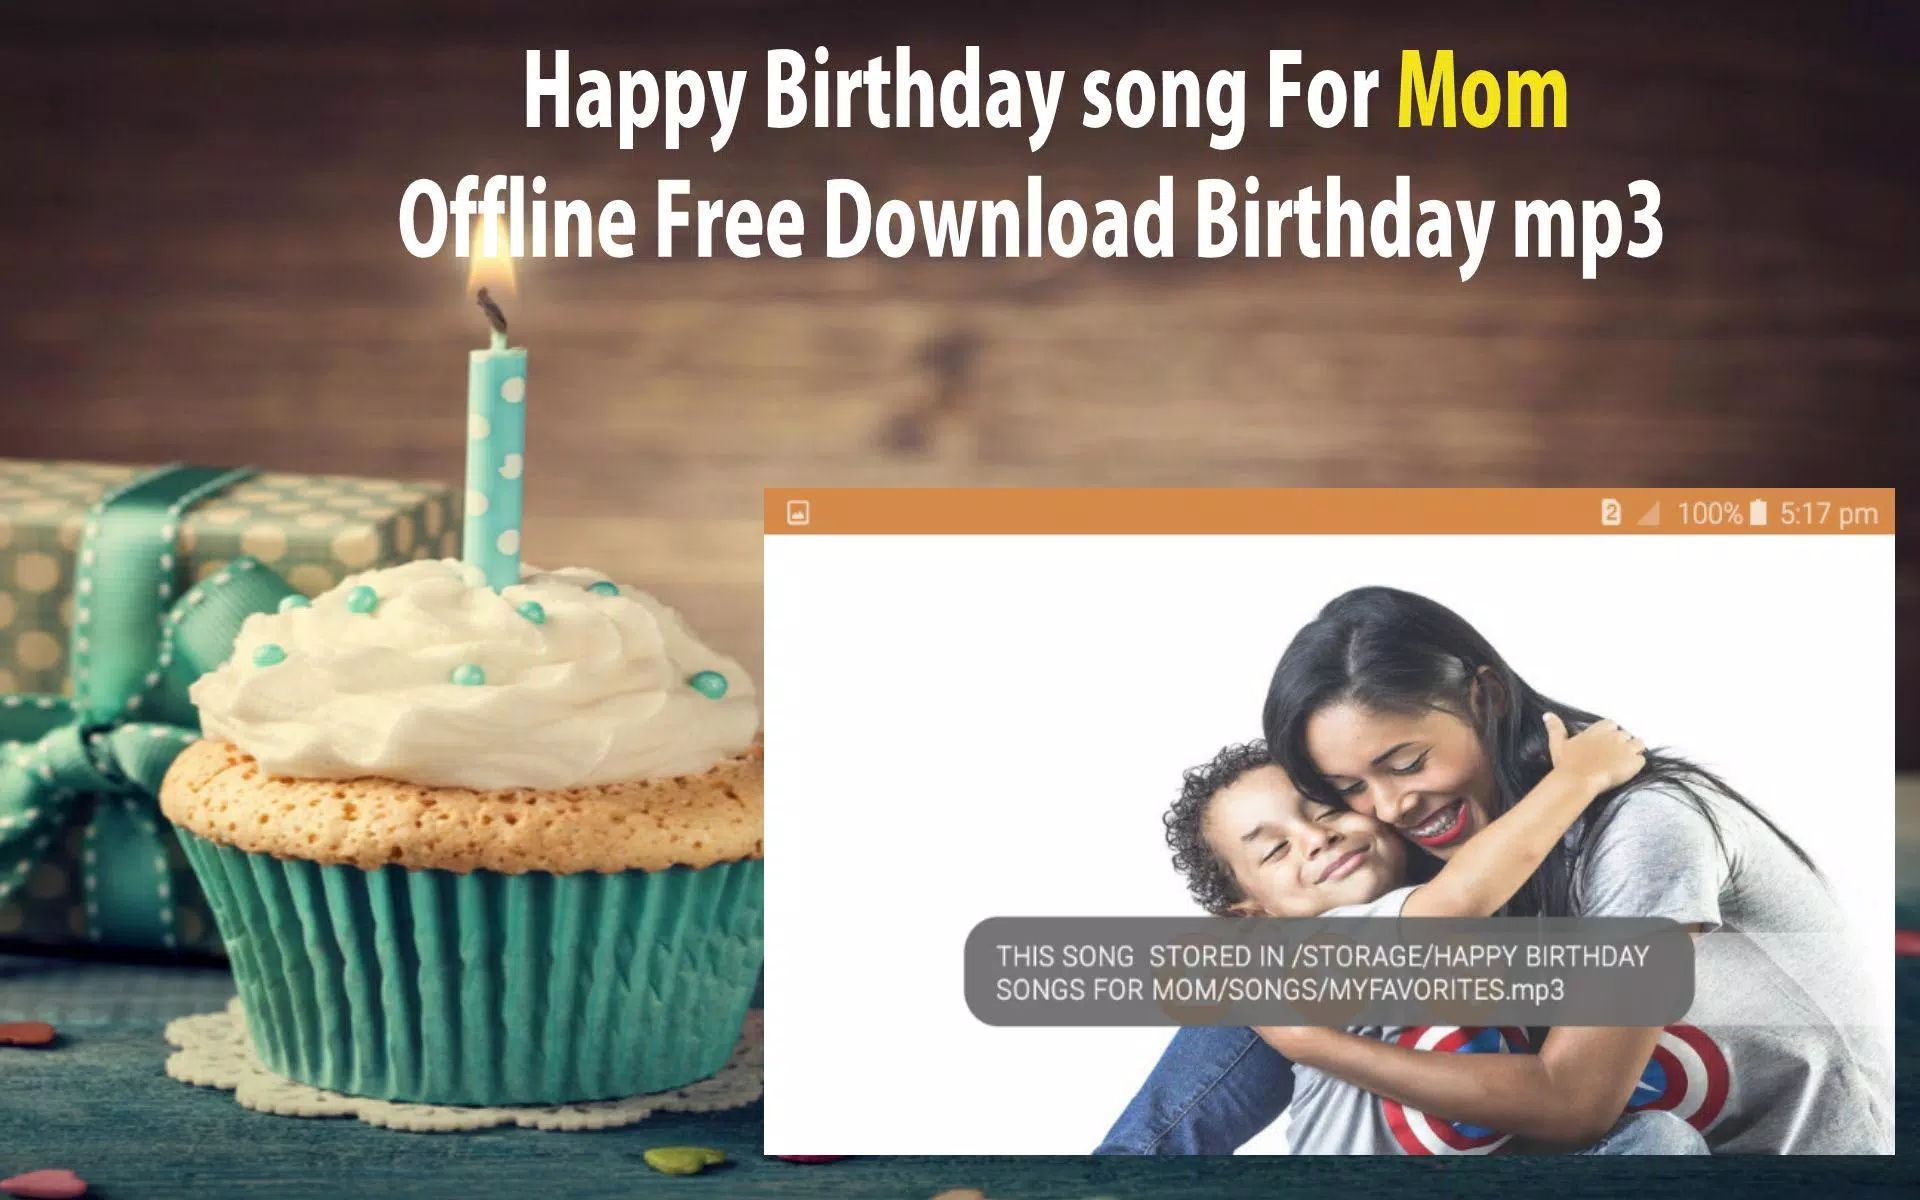 Happy Birthday Song For Mom for Android - APK Download